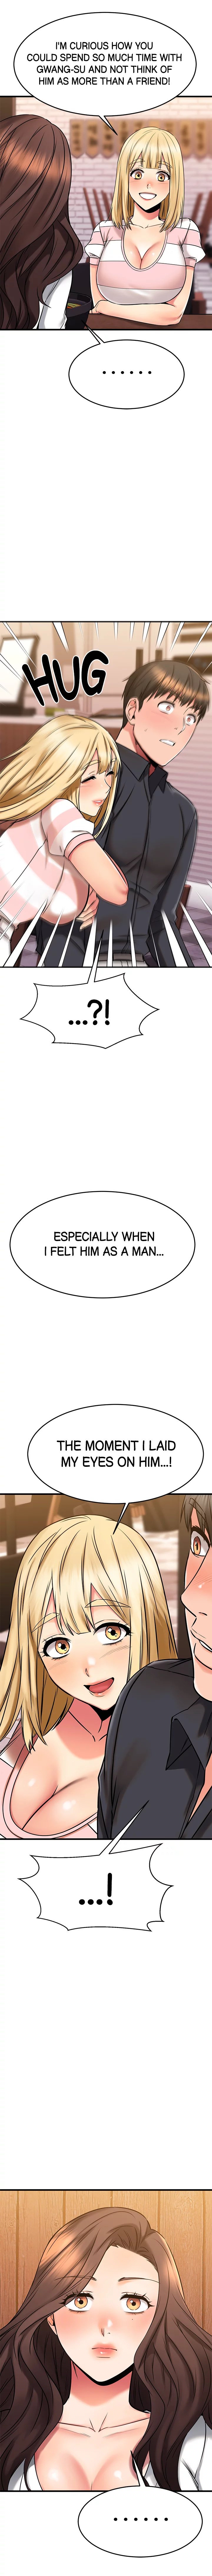 my-female-friend-who-crossed-the-line-chap-43-12